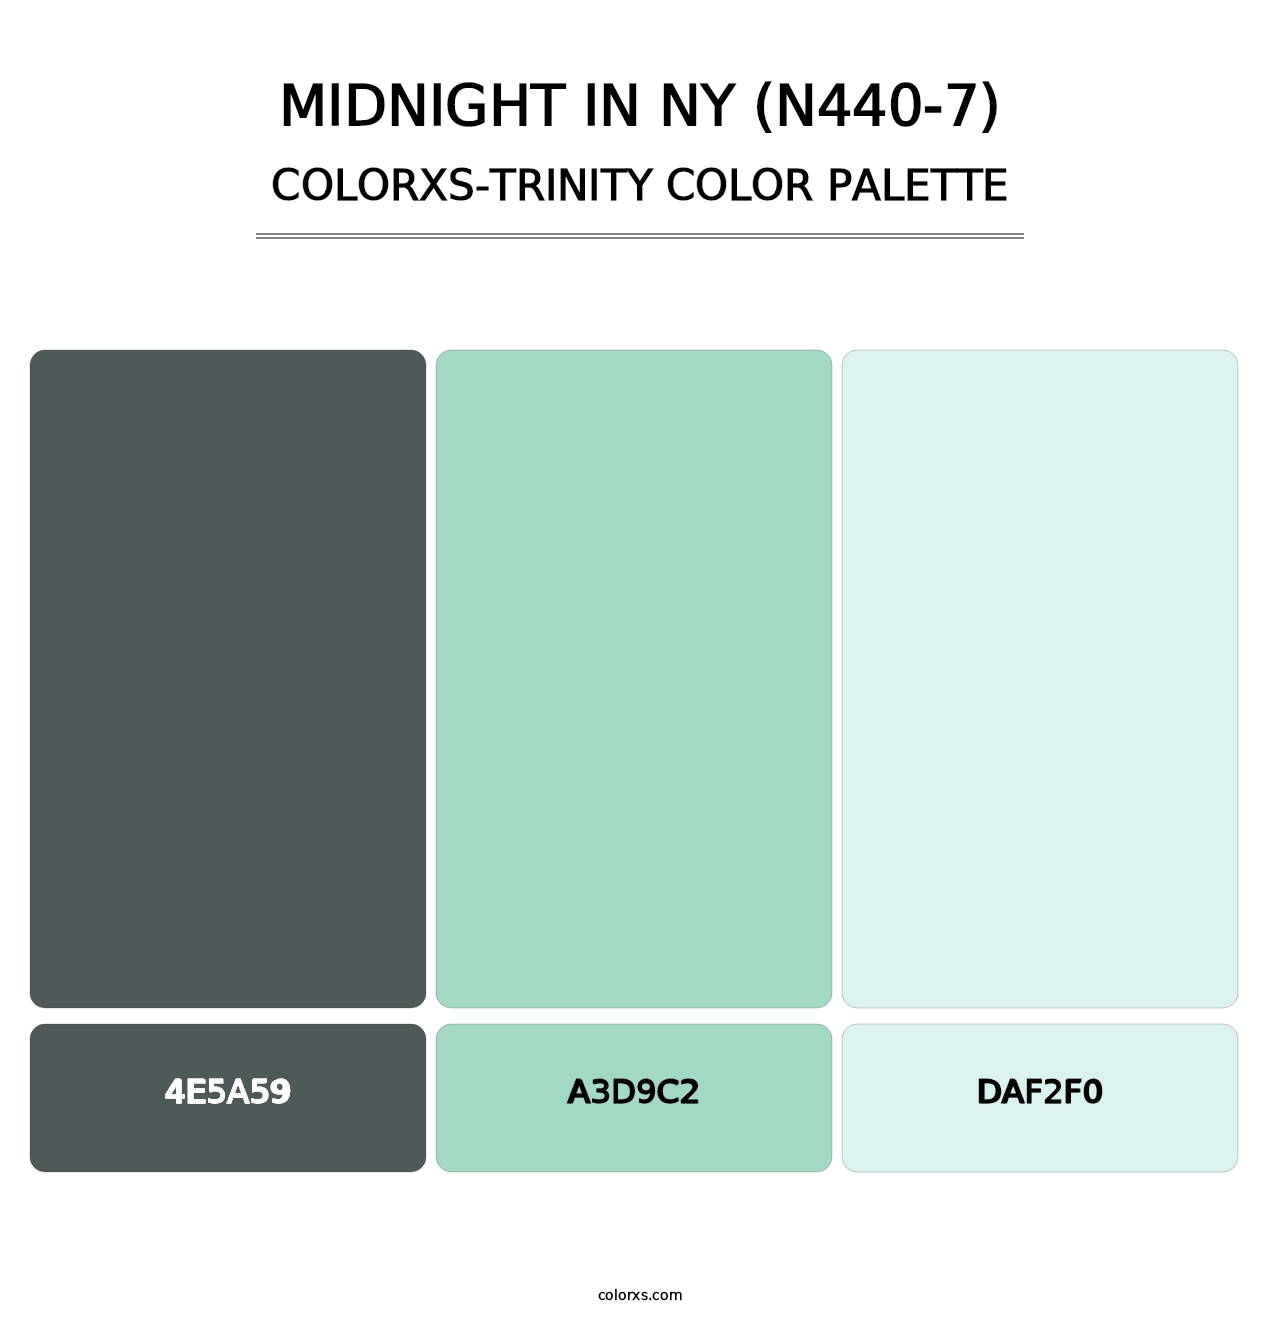 Midnight In Ny (N440-7) - Colorxs Trinity Palette